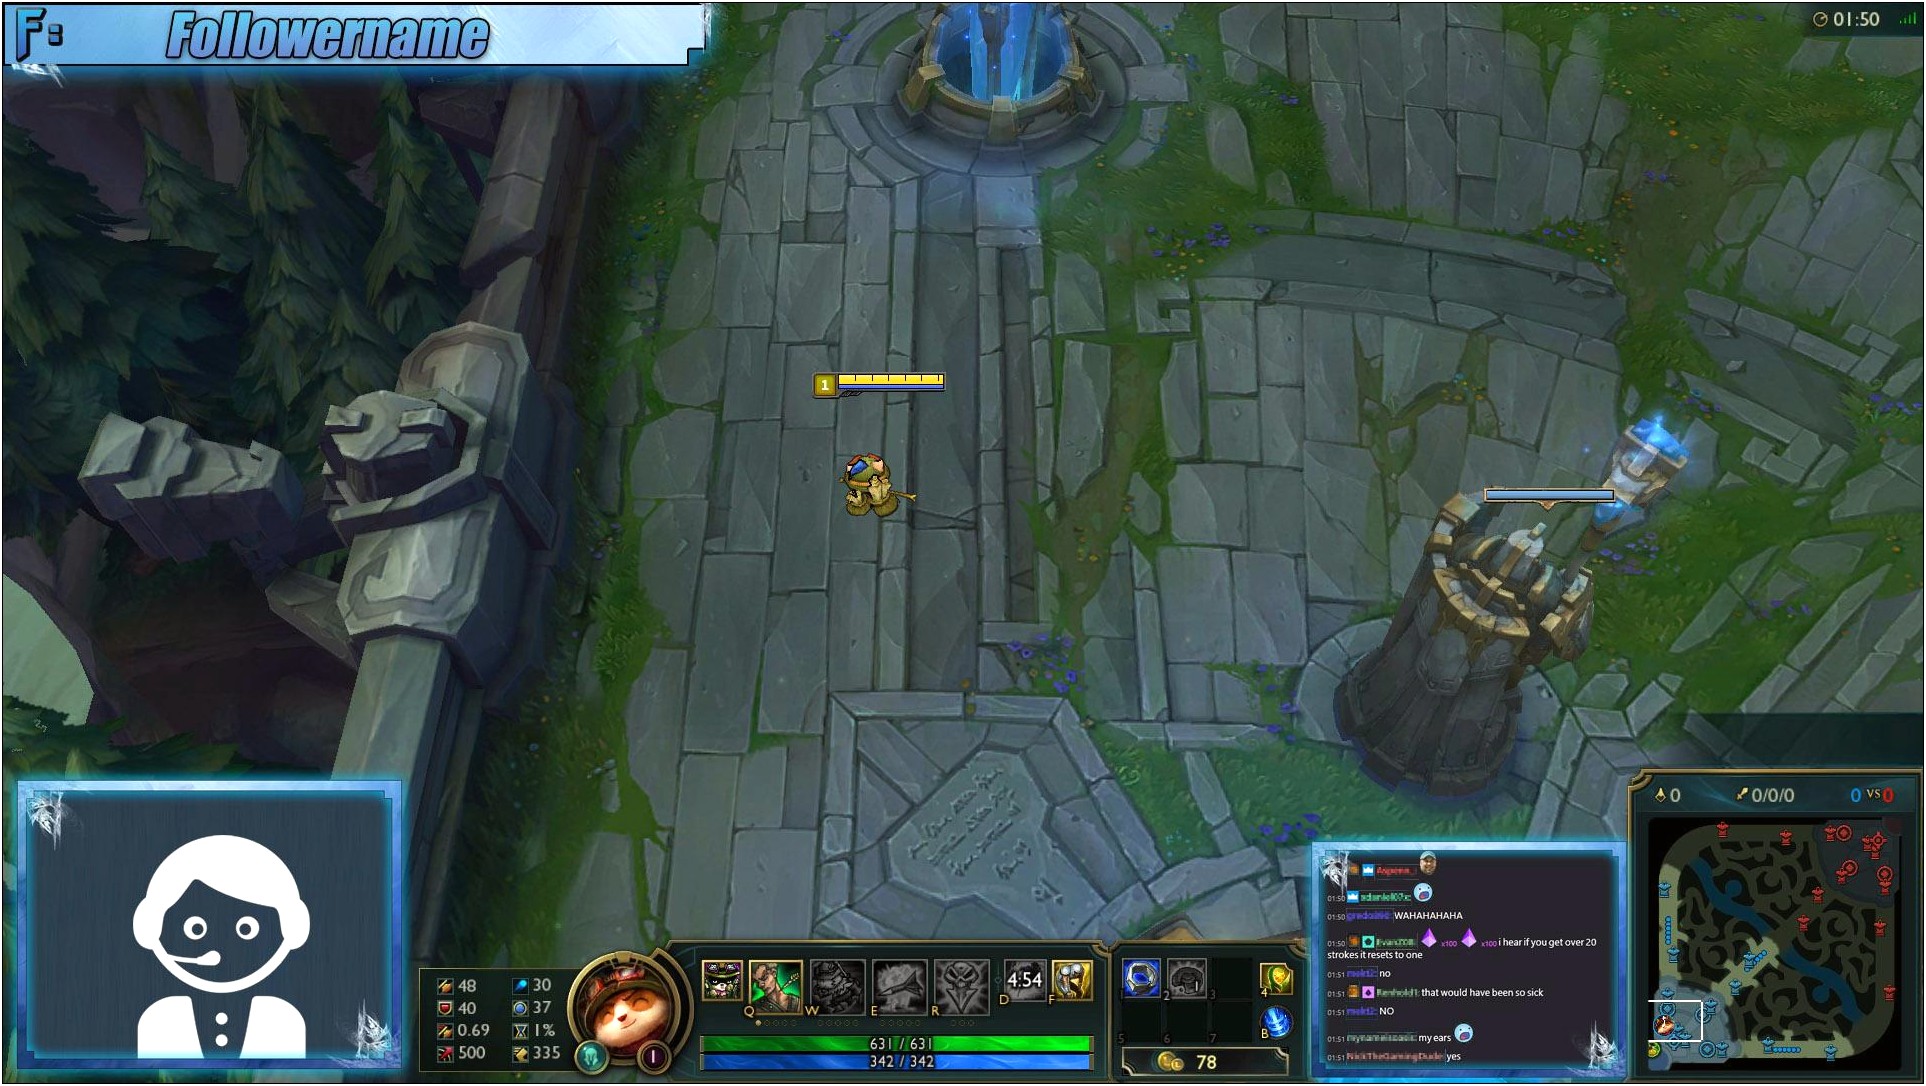 Free Twitch Overlay Template League Of Legends